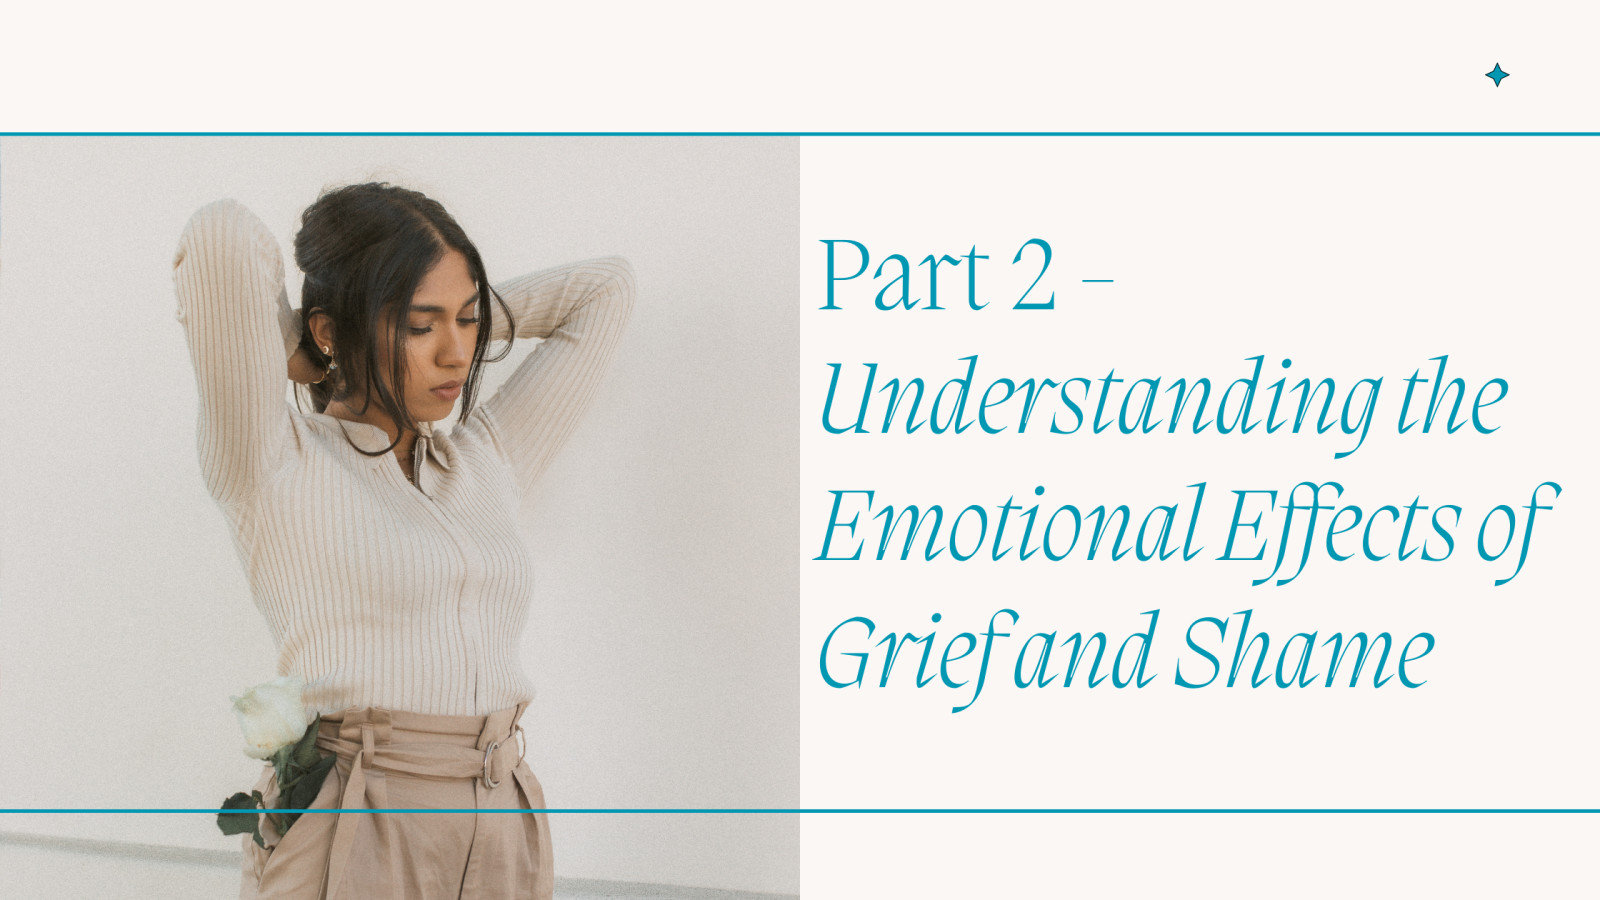 Part 2 - Understanding the Emotional Effects of Grief and Shame